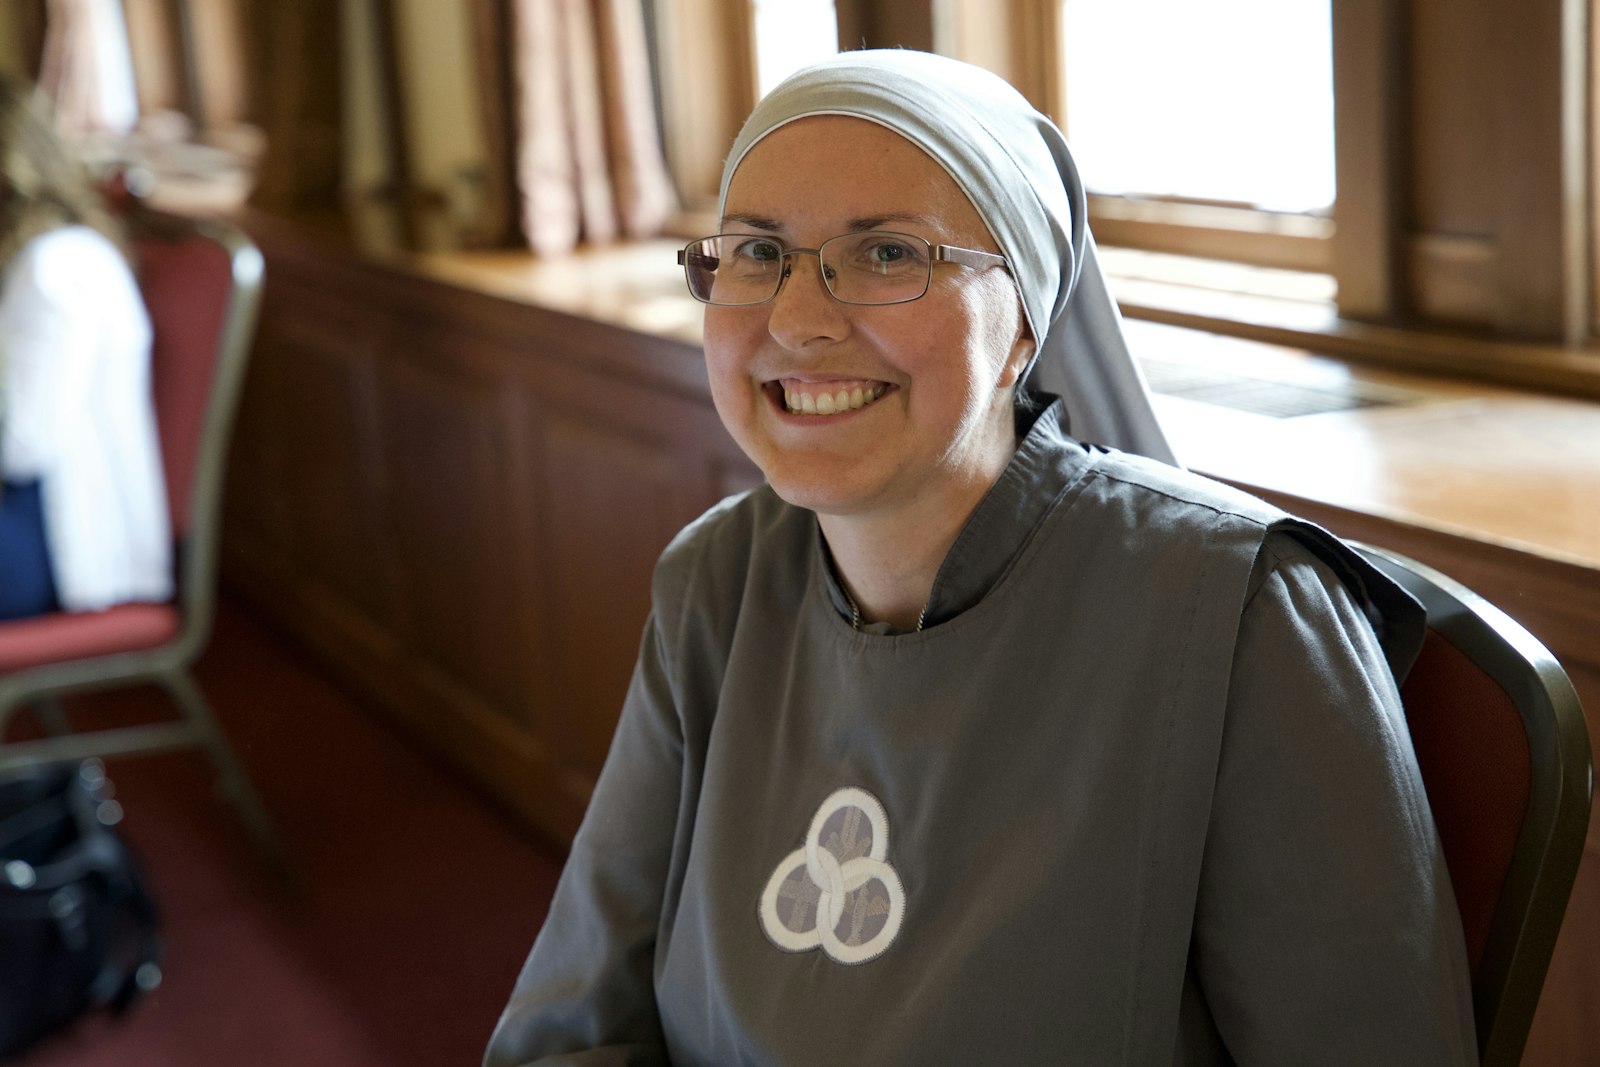 Sr. Kateri Burbee, SOLT, principal of Holy Redeemer Grade School in Detroit, told Detroit Catholic that knowing the foundation of the Theology of the Body is important to help everyone know and understand that God loves them and made them with dignity. (Gabriella Patti | Detroit Catholic)